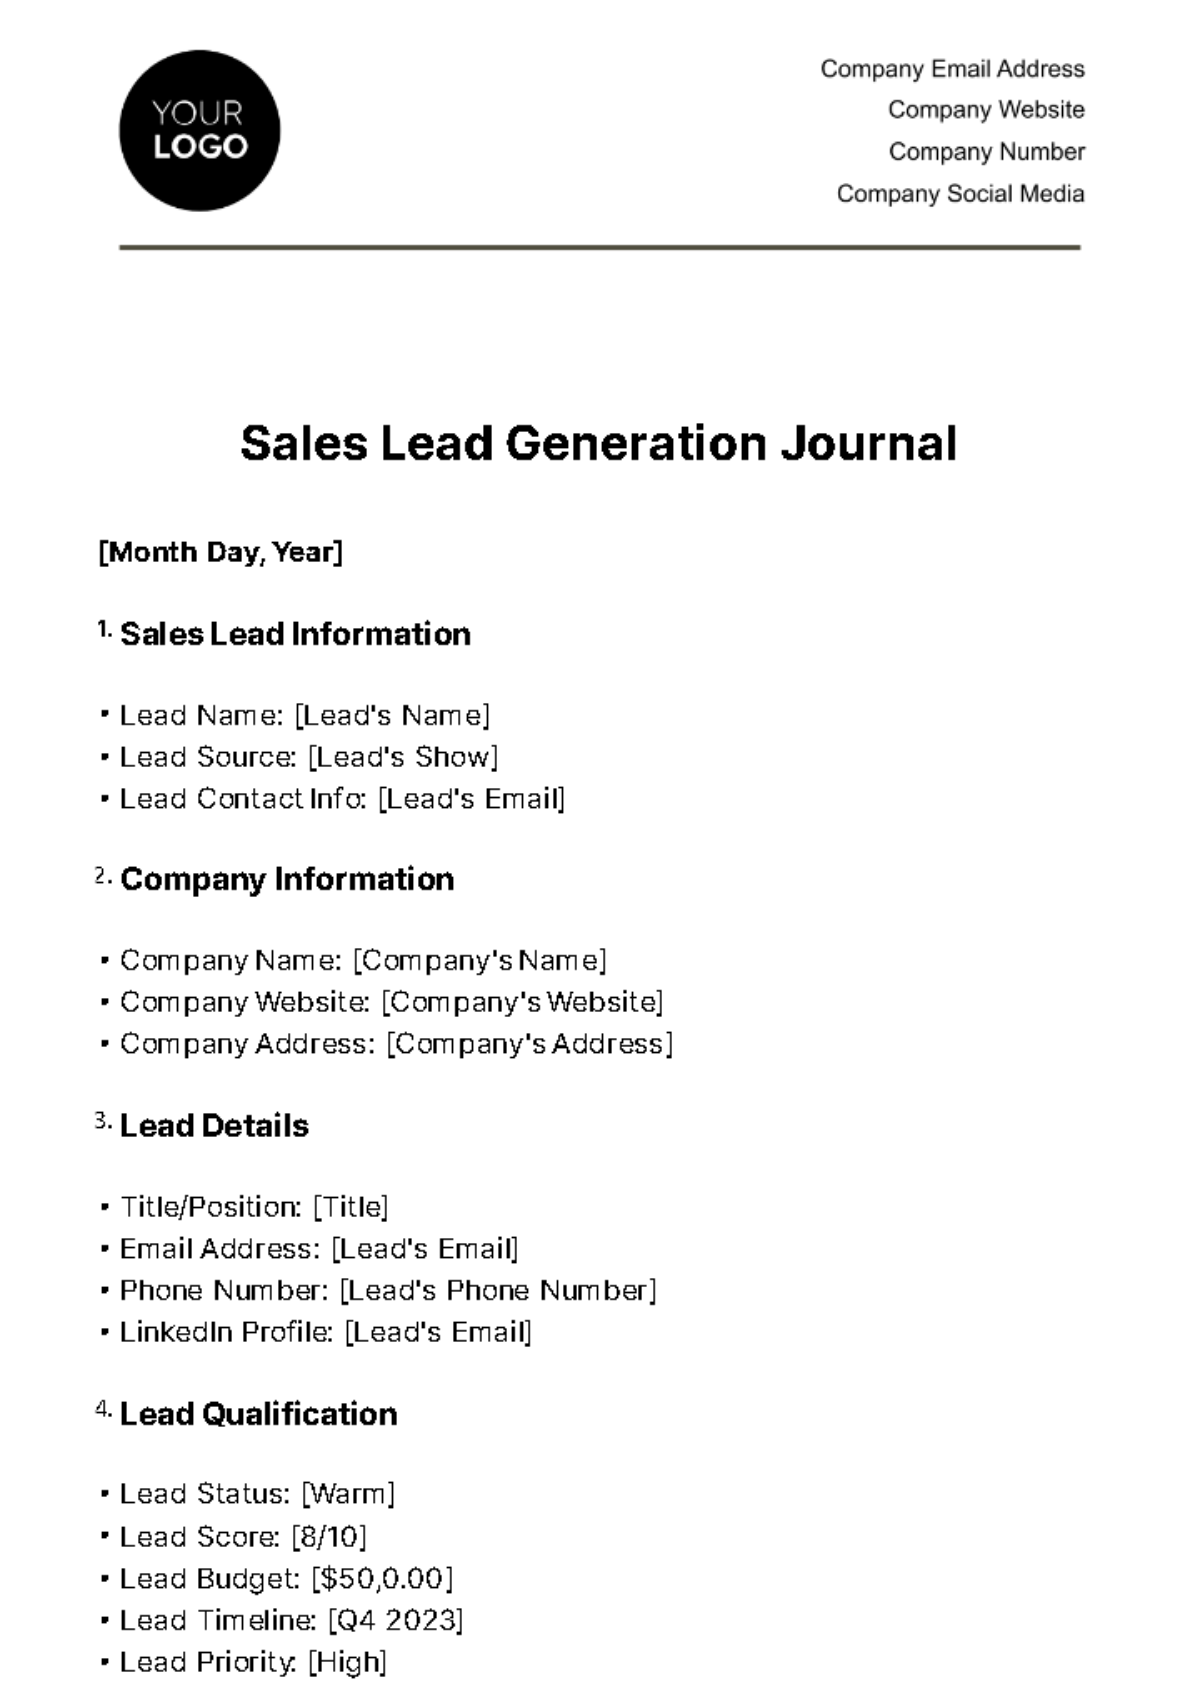 Free Sales Lead Generation Journal Template